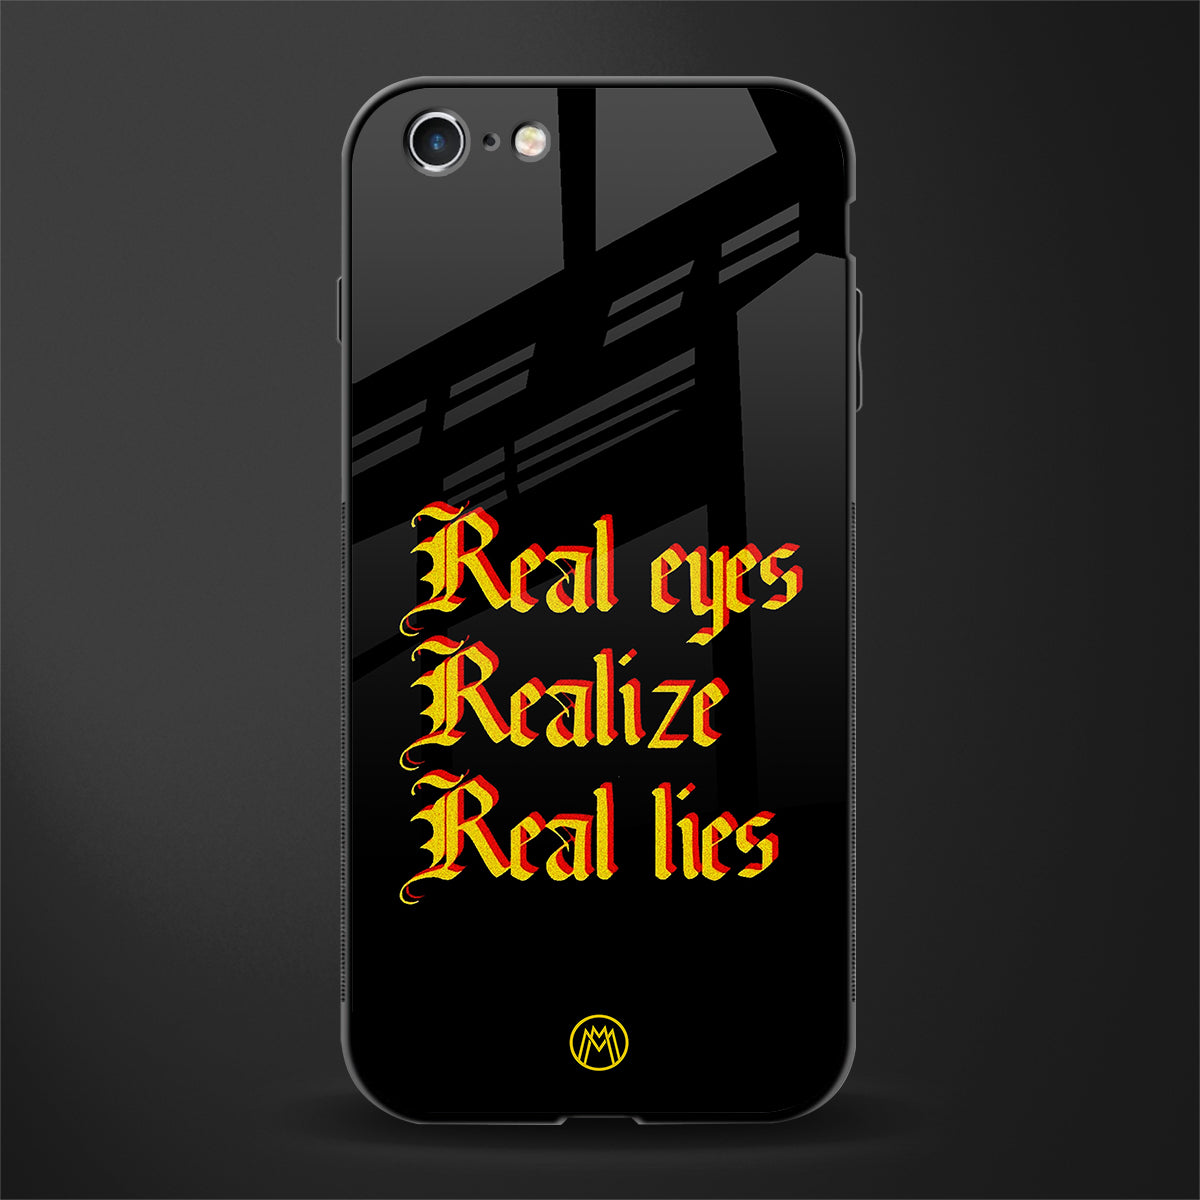 real eyes realize real lies quote glass case for iphone 6 image